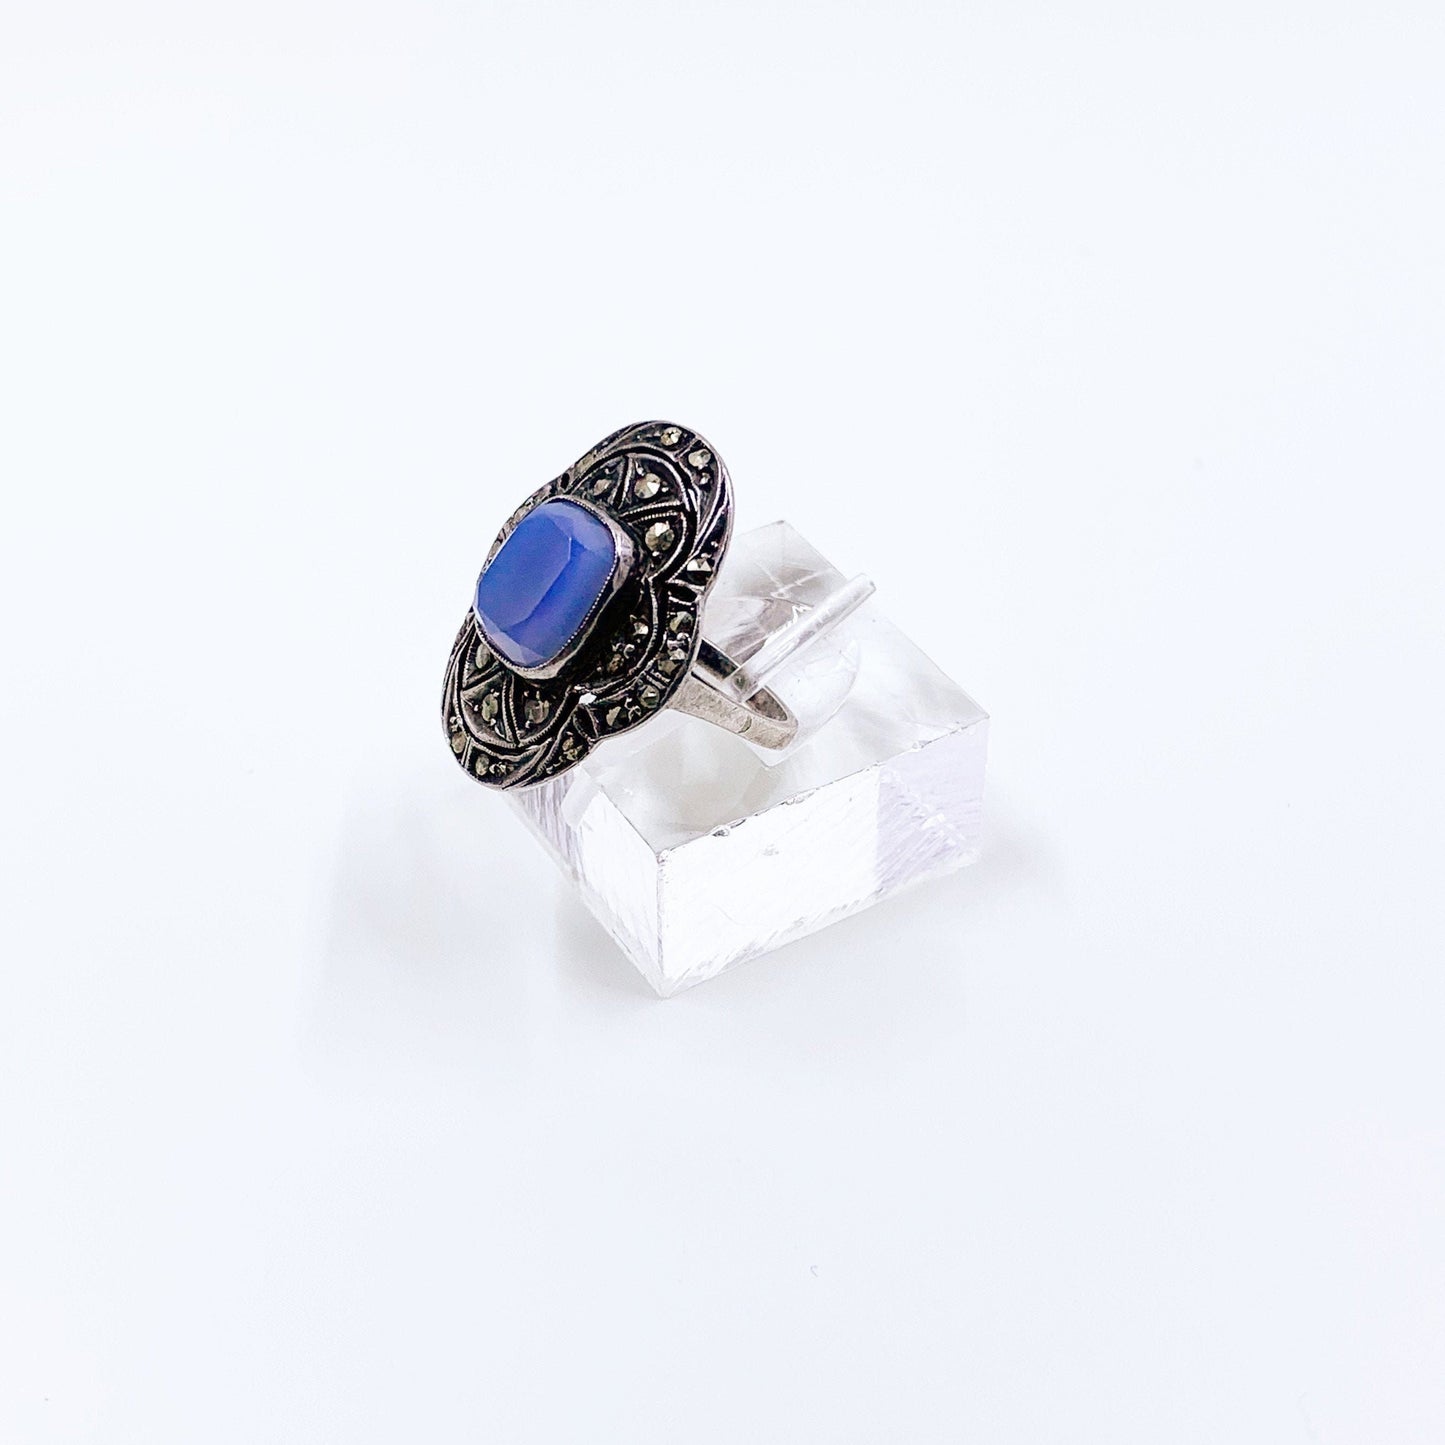 Vintage German Art Deco Marcasite Silver Ring | Sterling Blue Stone Ring | Size 5 1/2